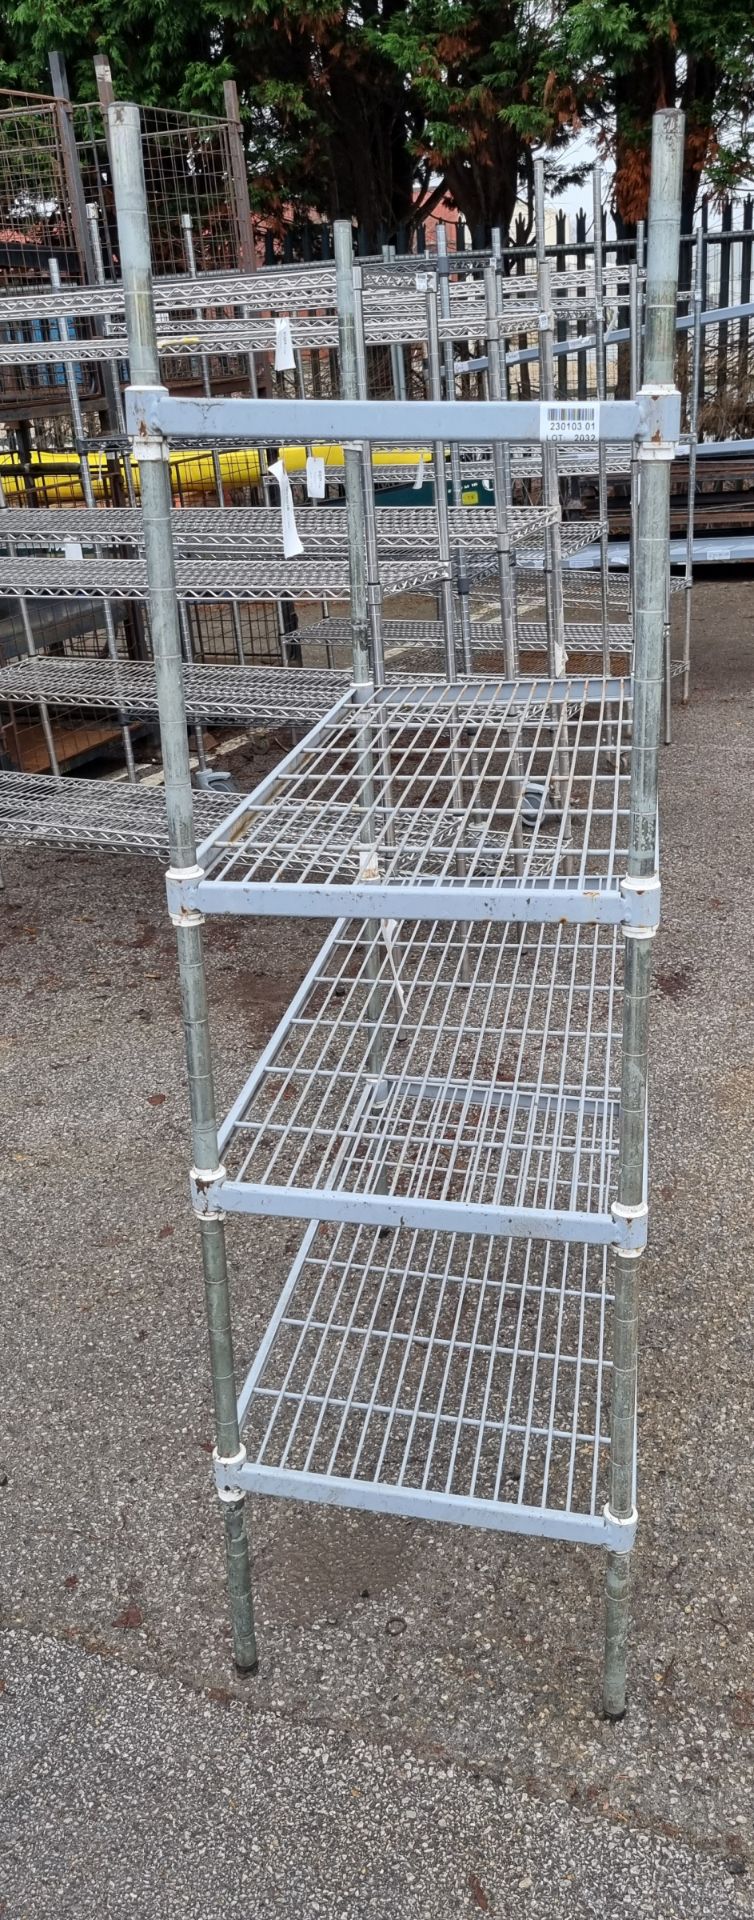 Stainless steel 4 tier wire racking - L105 x W50 x H171cm - Image 2 of 2